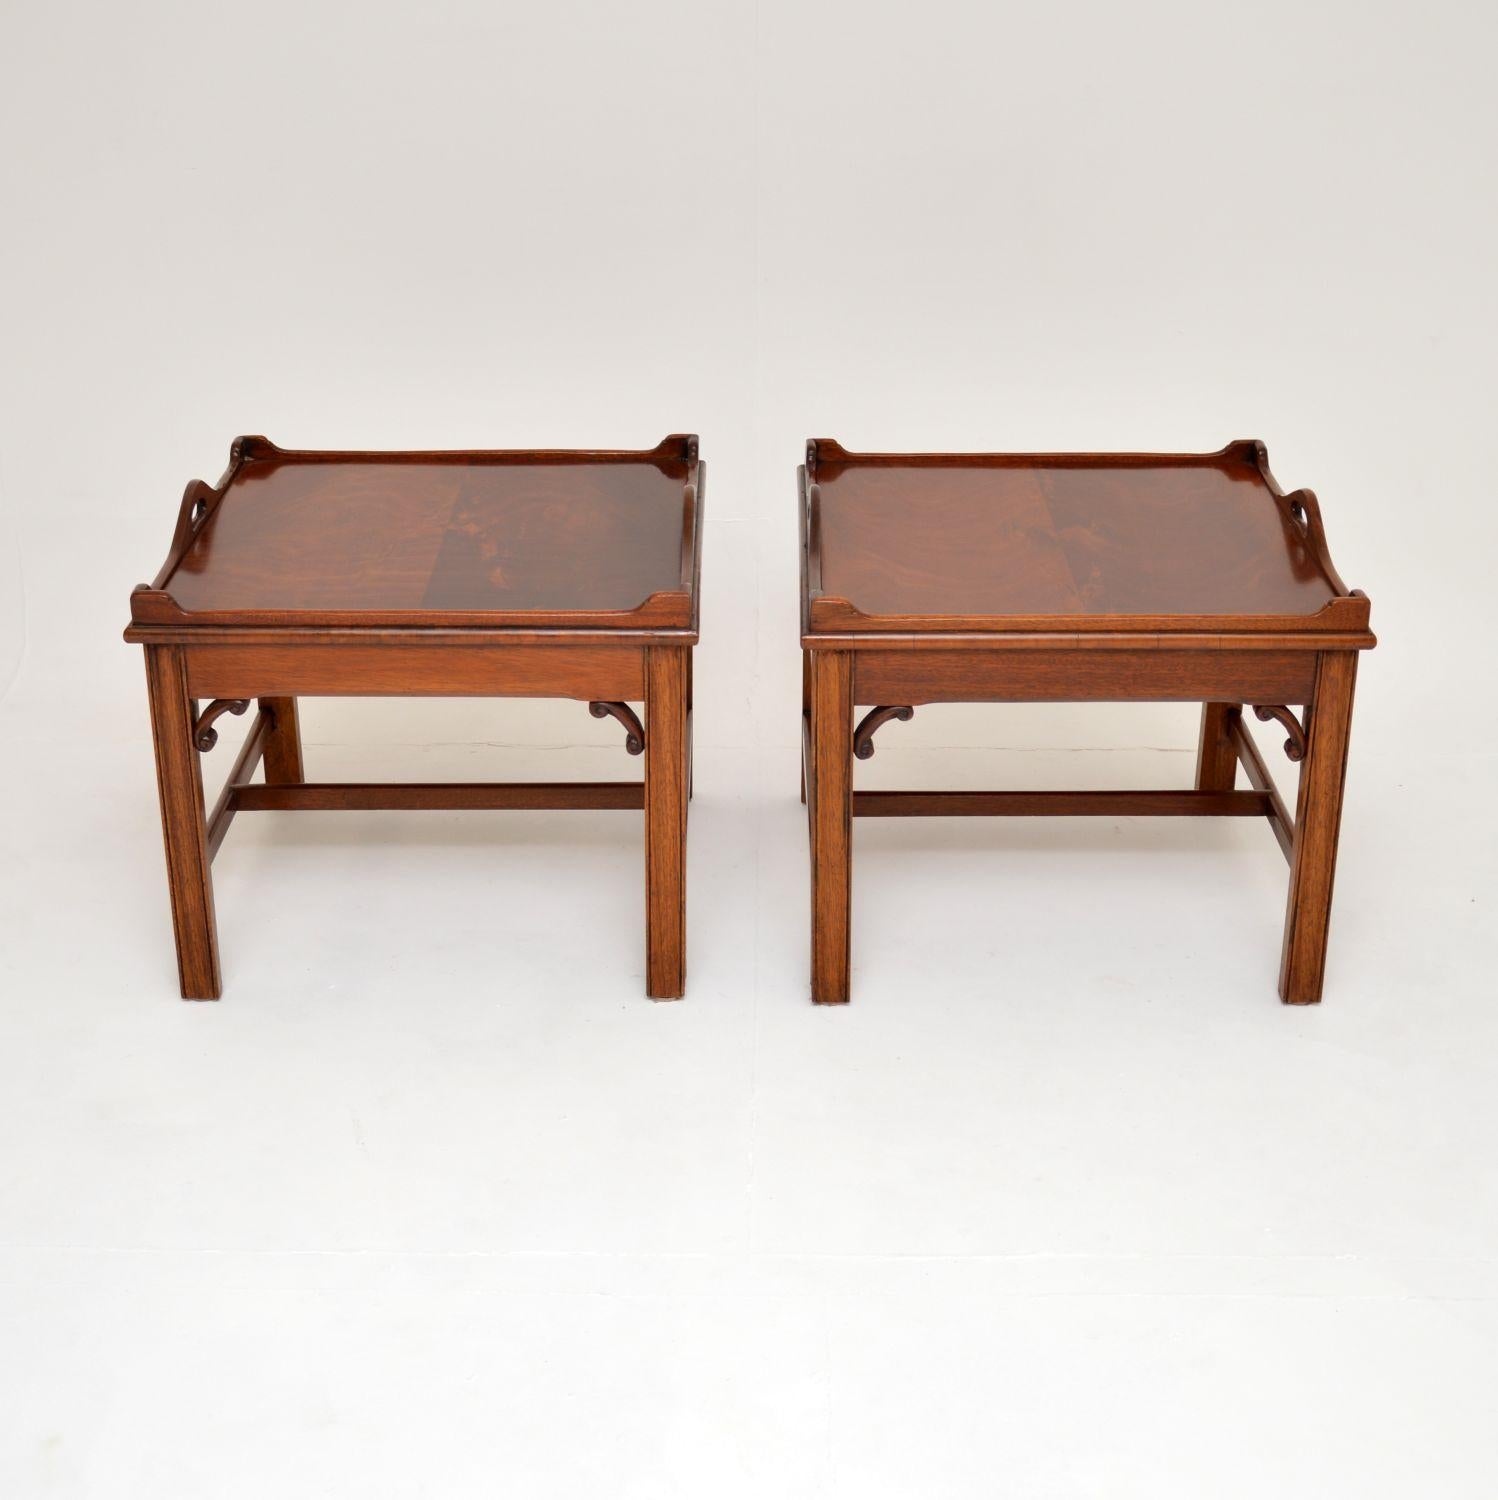 An excellent pair of antique Chippendale style tray top side tables. These were made in England, and date from around the 1930's period.

They are a very useful and impressive size, perfect for use in a lounge either side of a large sofa. The wood